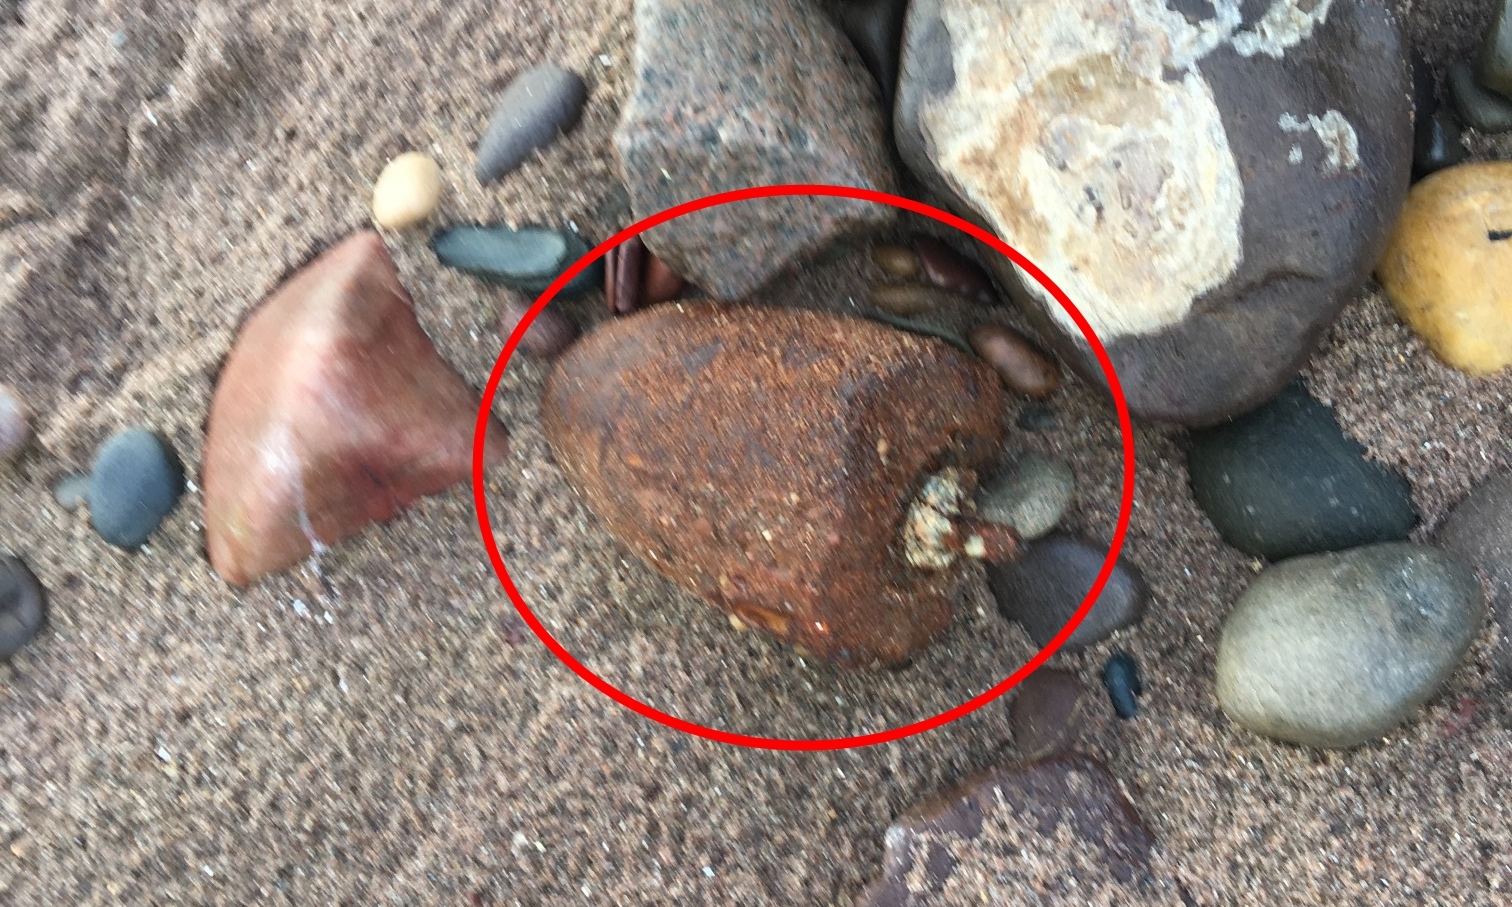 The ordnance was found with the pin still in place.